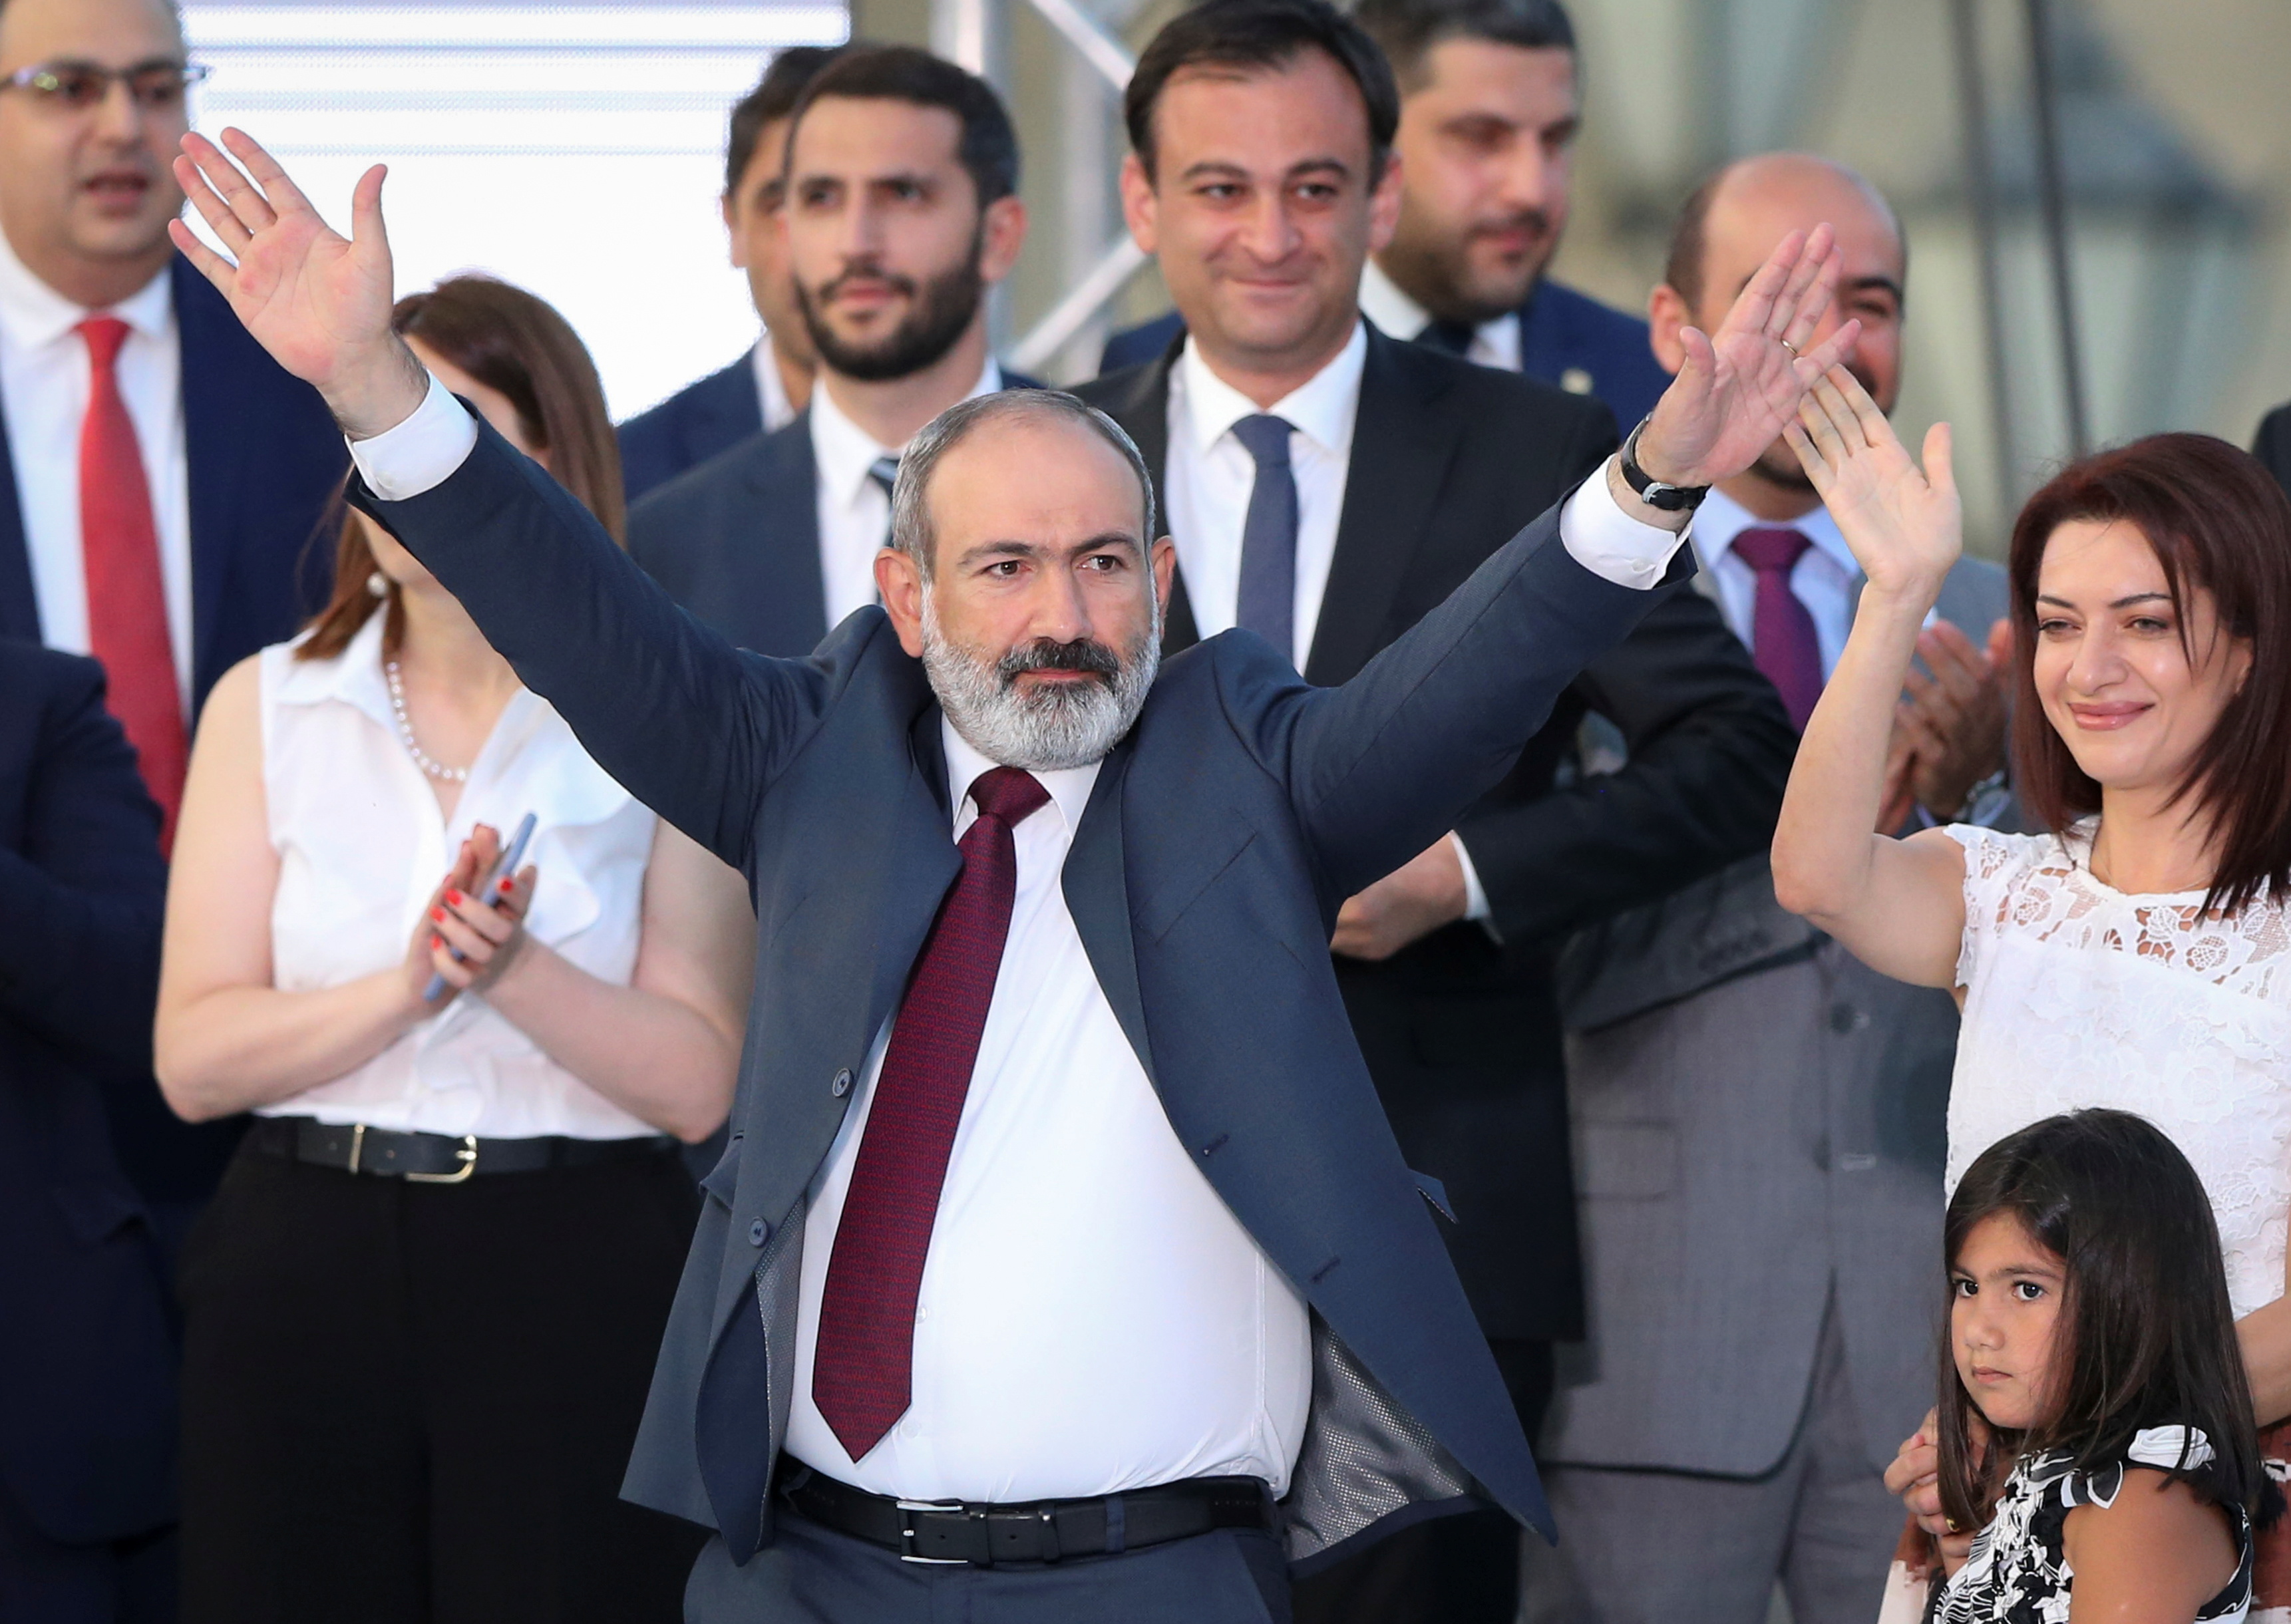 Leader of Civil Contract party Nikol Pashinyan attends a rally in Yerevan